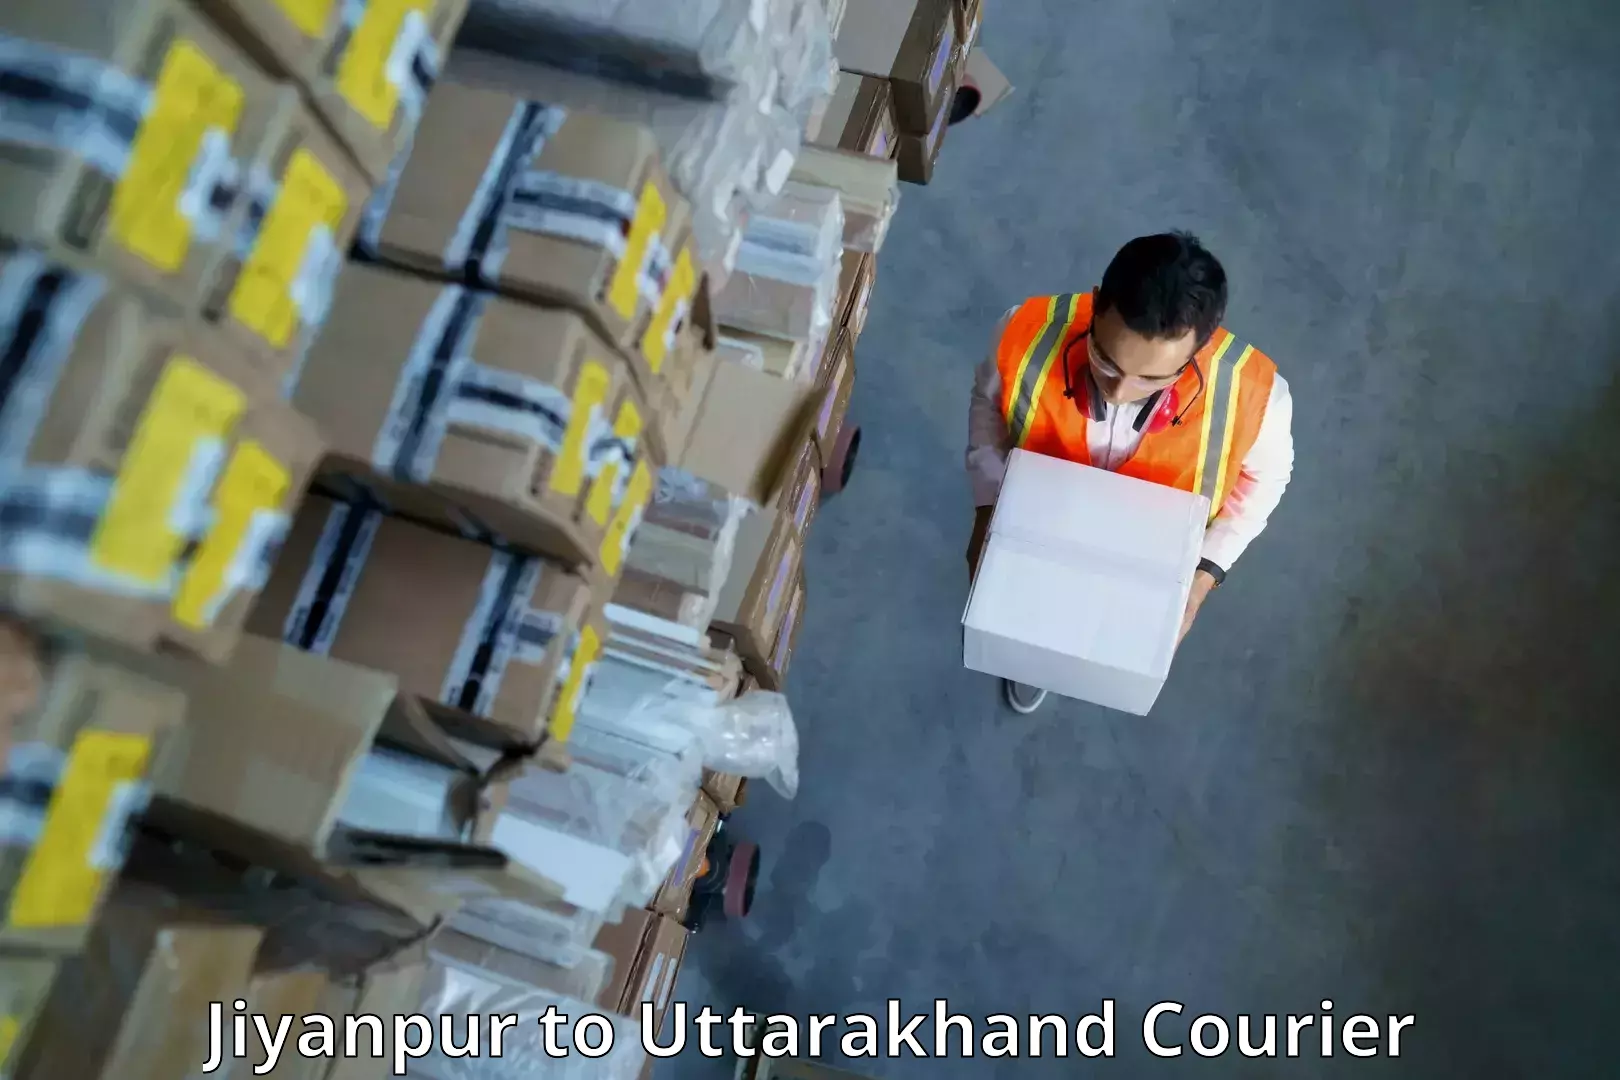 On-call courier service Jiyanpur to Didihat